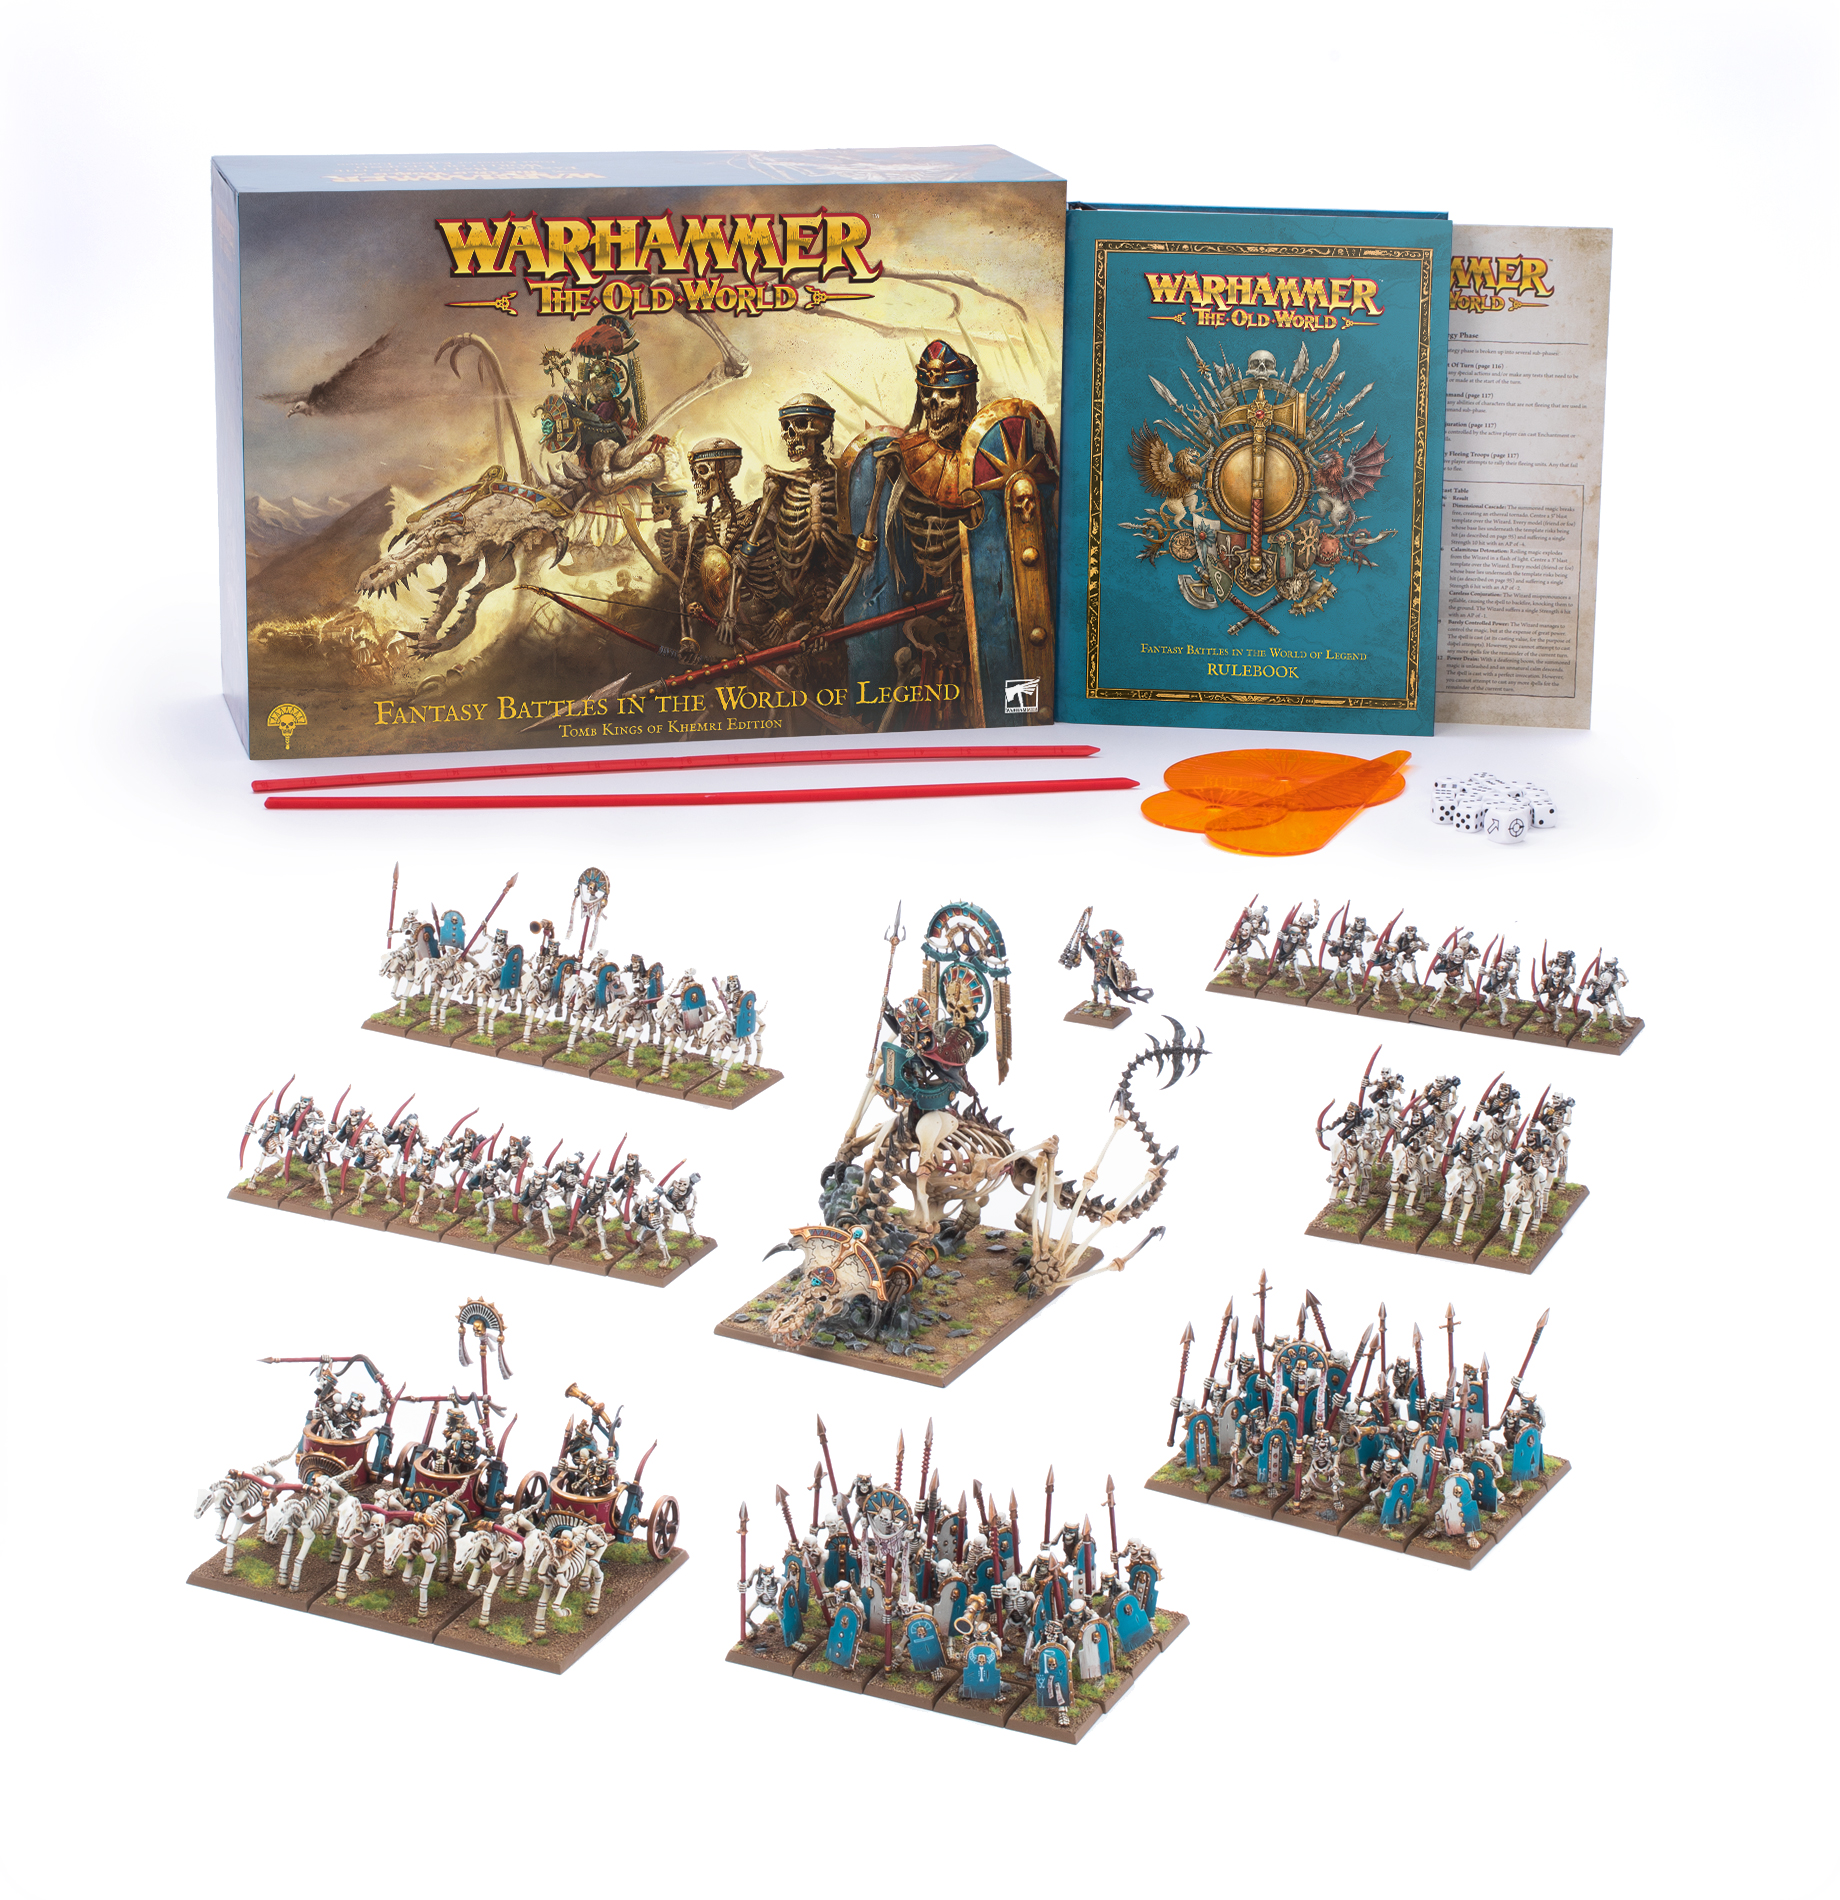 Warhammer: The Old World: Tomb Kings of Khemri Edition 